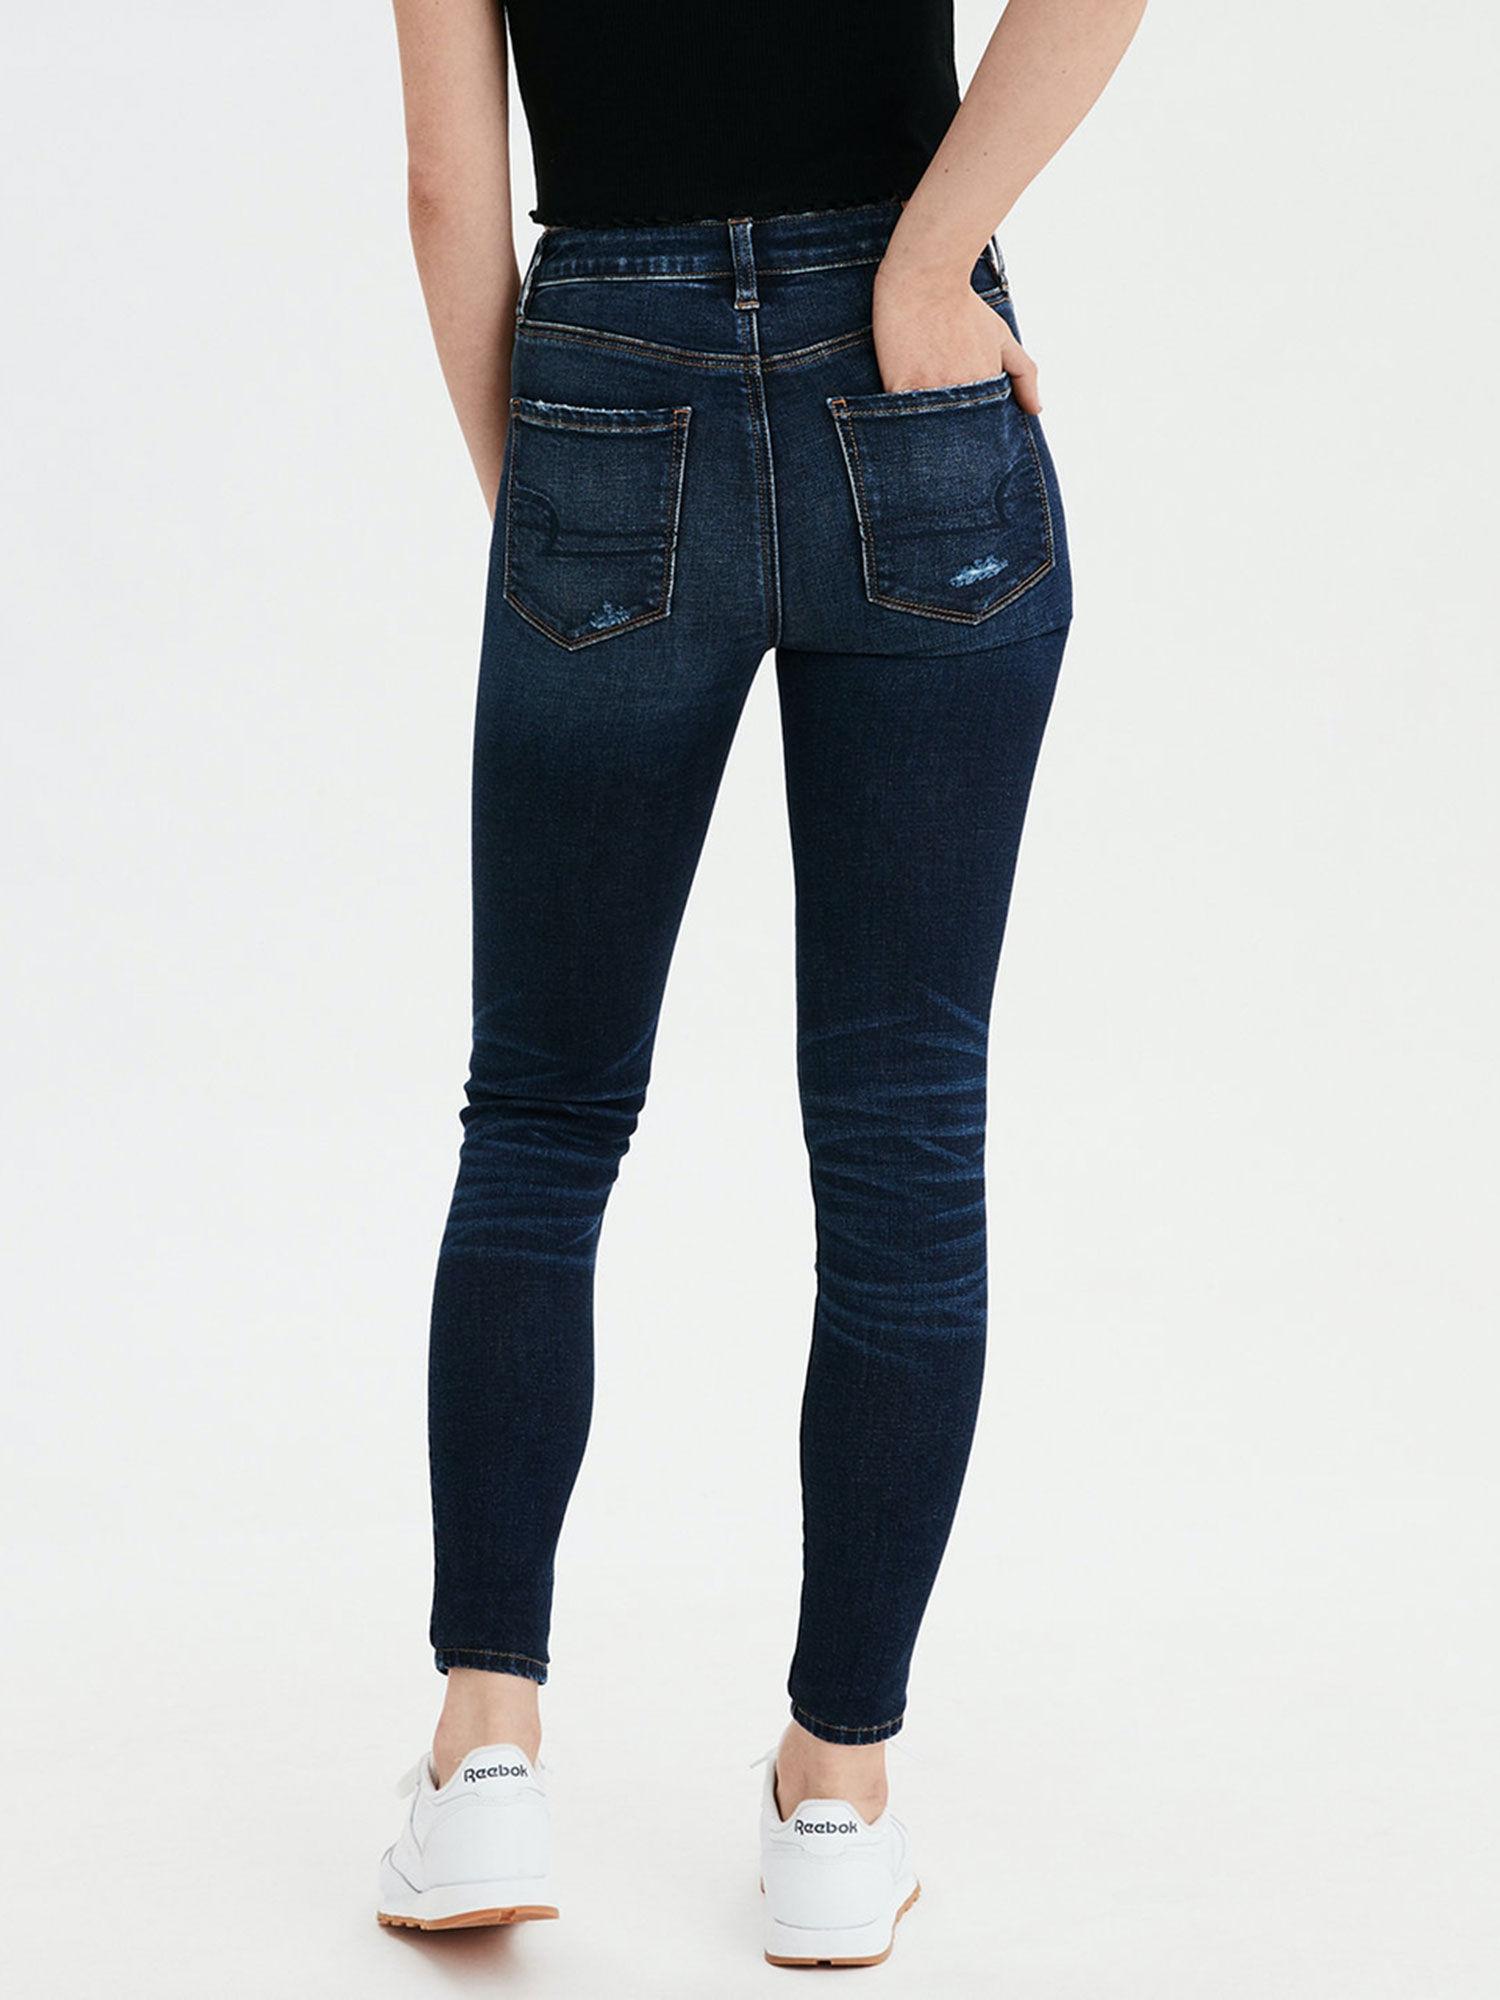 outfiiters super high-waisted jeggings